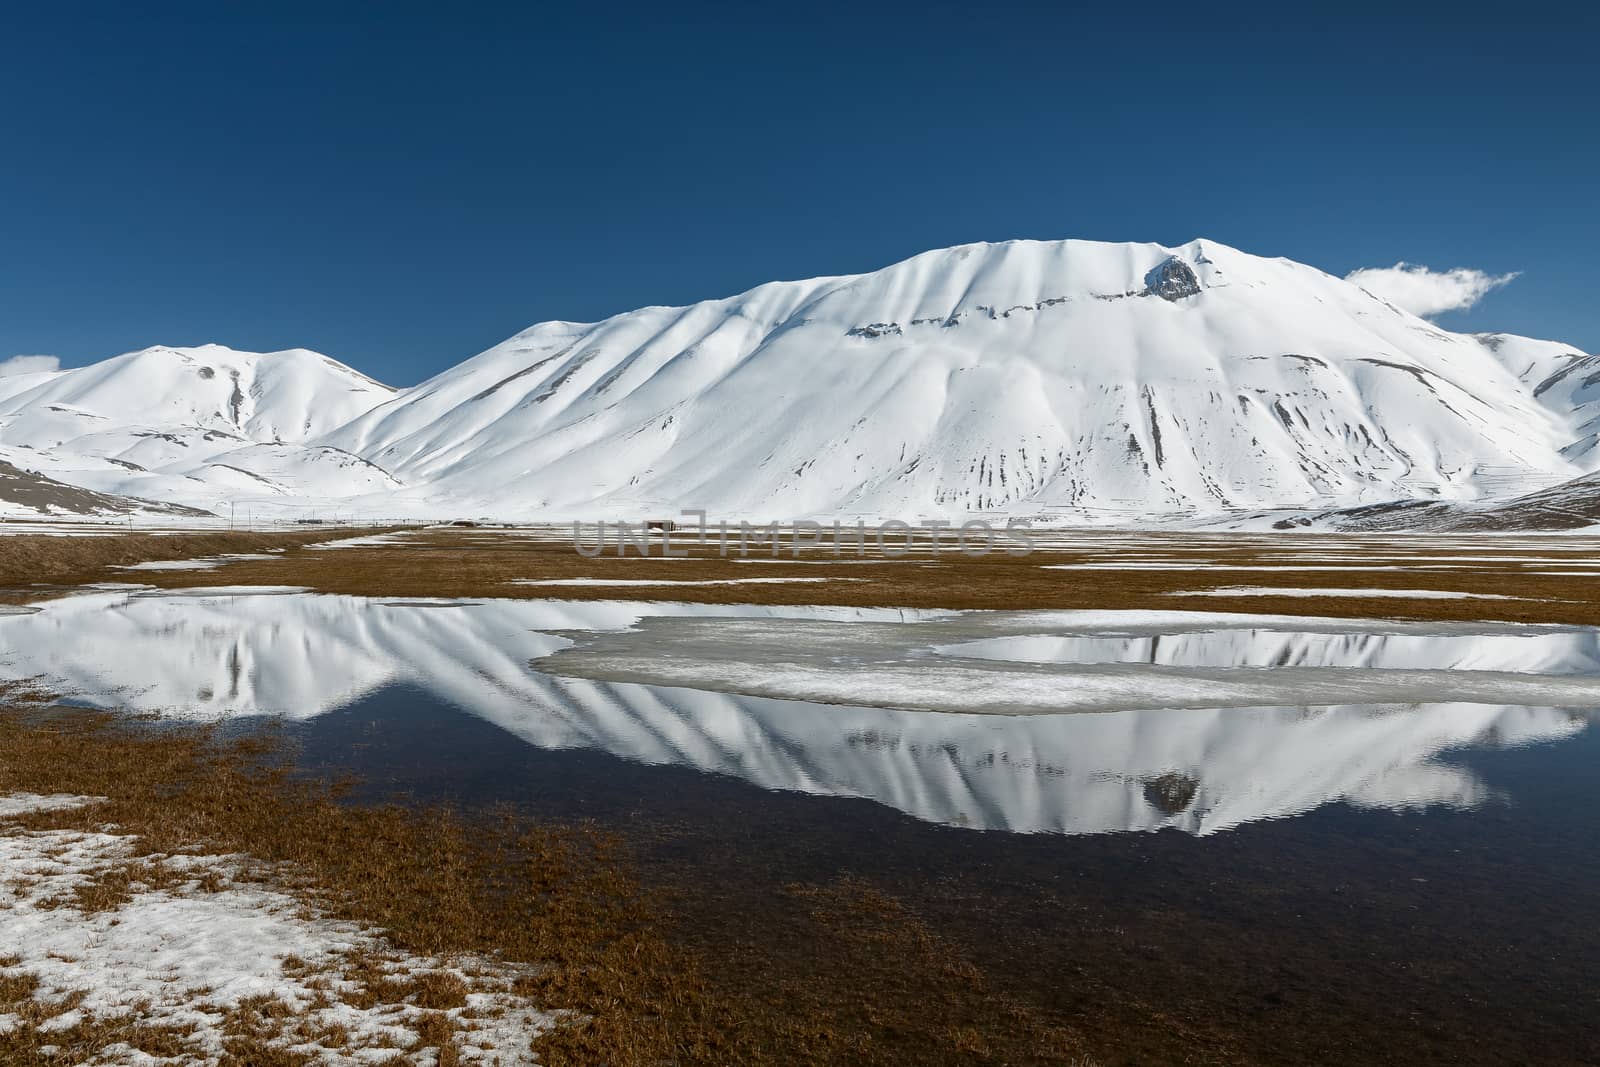 Sibillini mountains reflected in the water with snow by LuigiMorbidelli